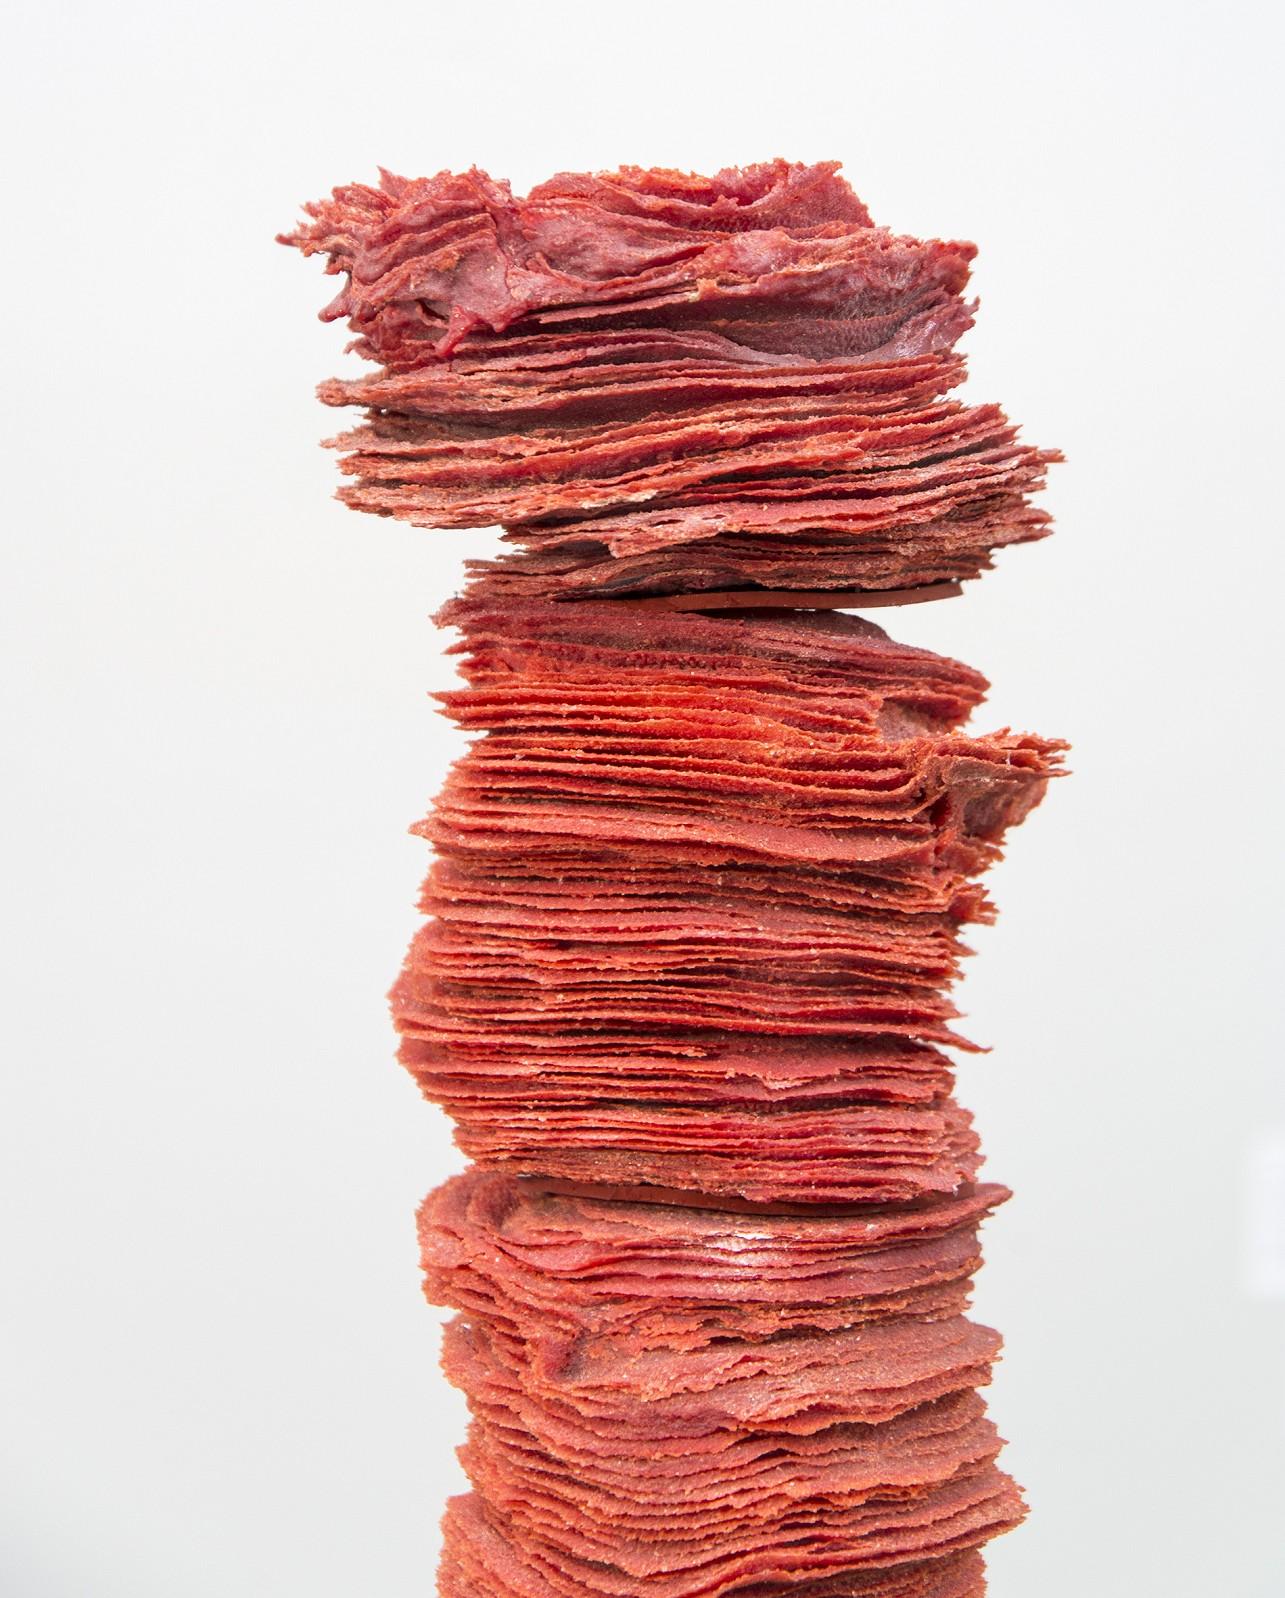 Rising Trio - tall, dynamic, textured, red, glass columns sculpture - Contemporary Sculpture by Cheryl Wilson Smith